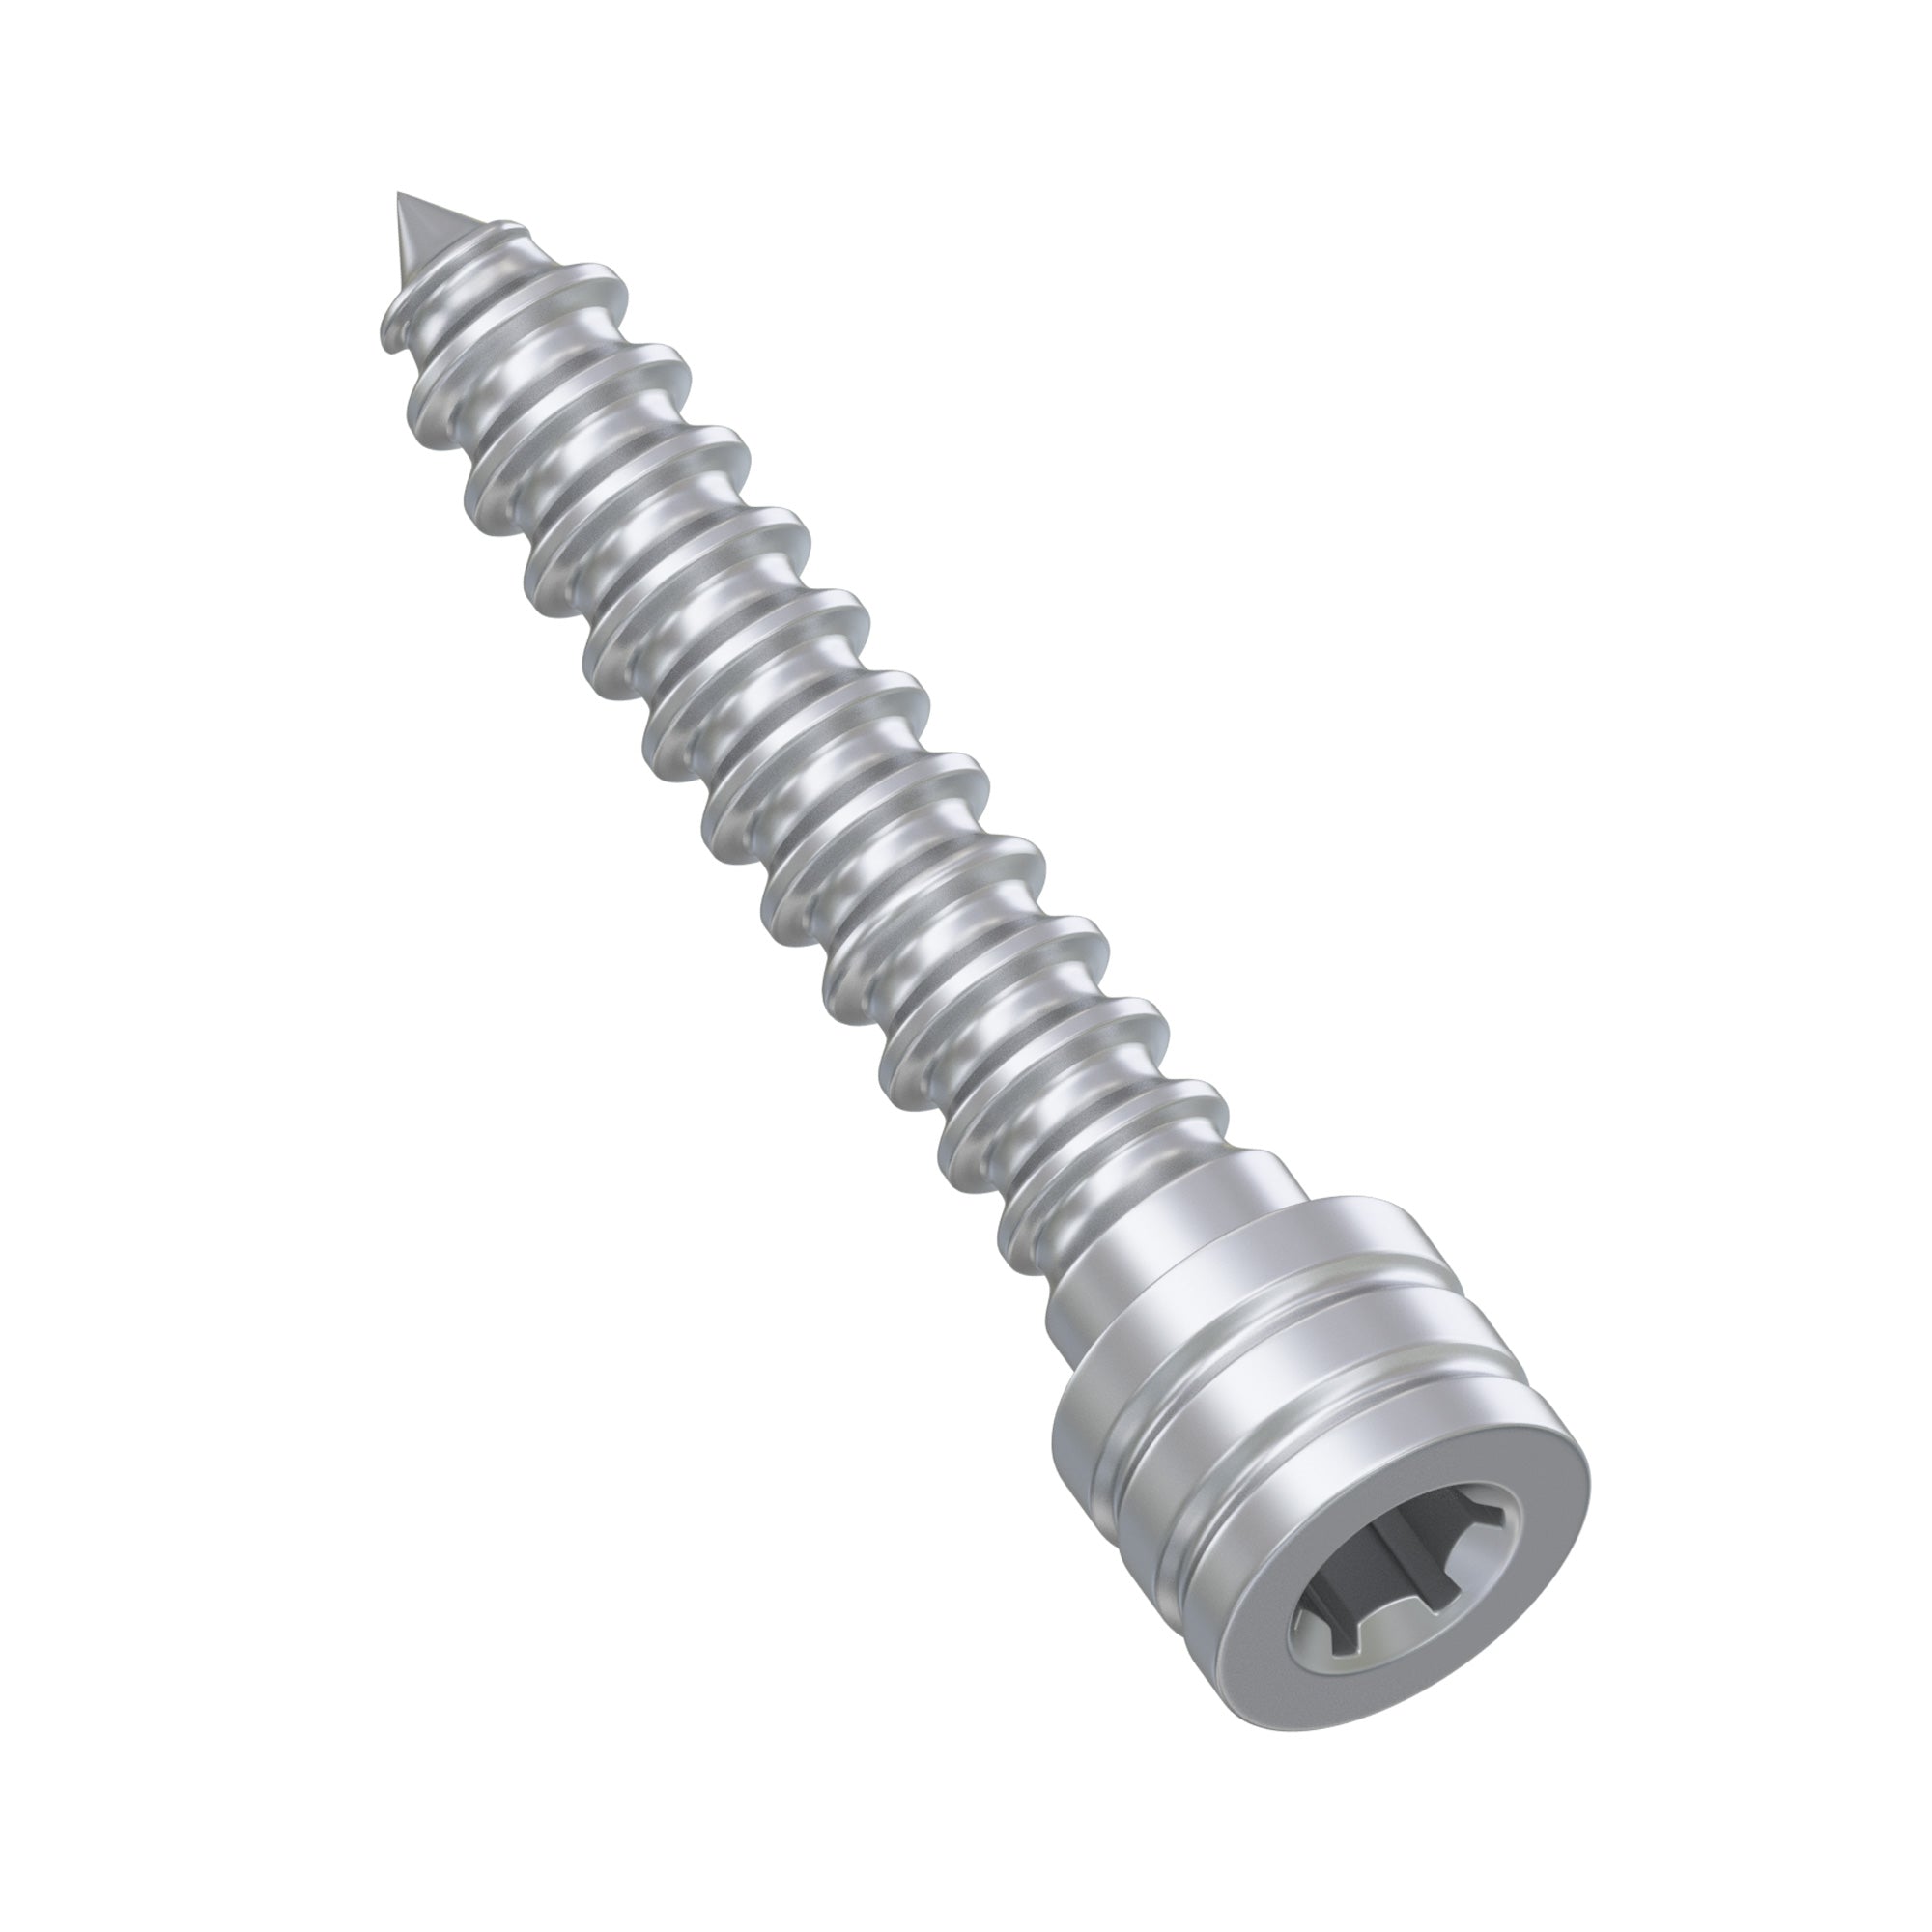 DSI Anchor Fixation Screw For Surgical Guide Appliance Stabilization